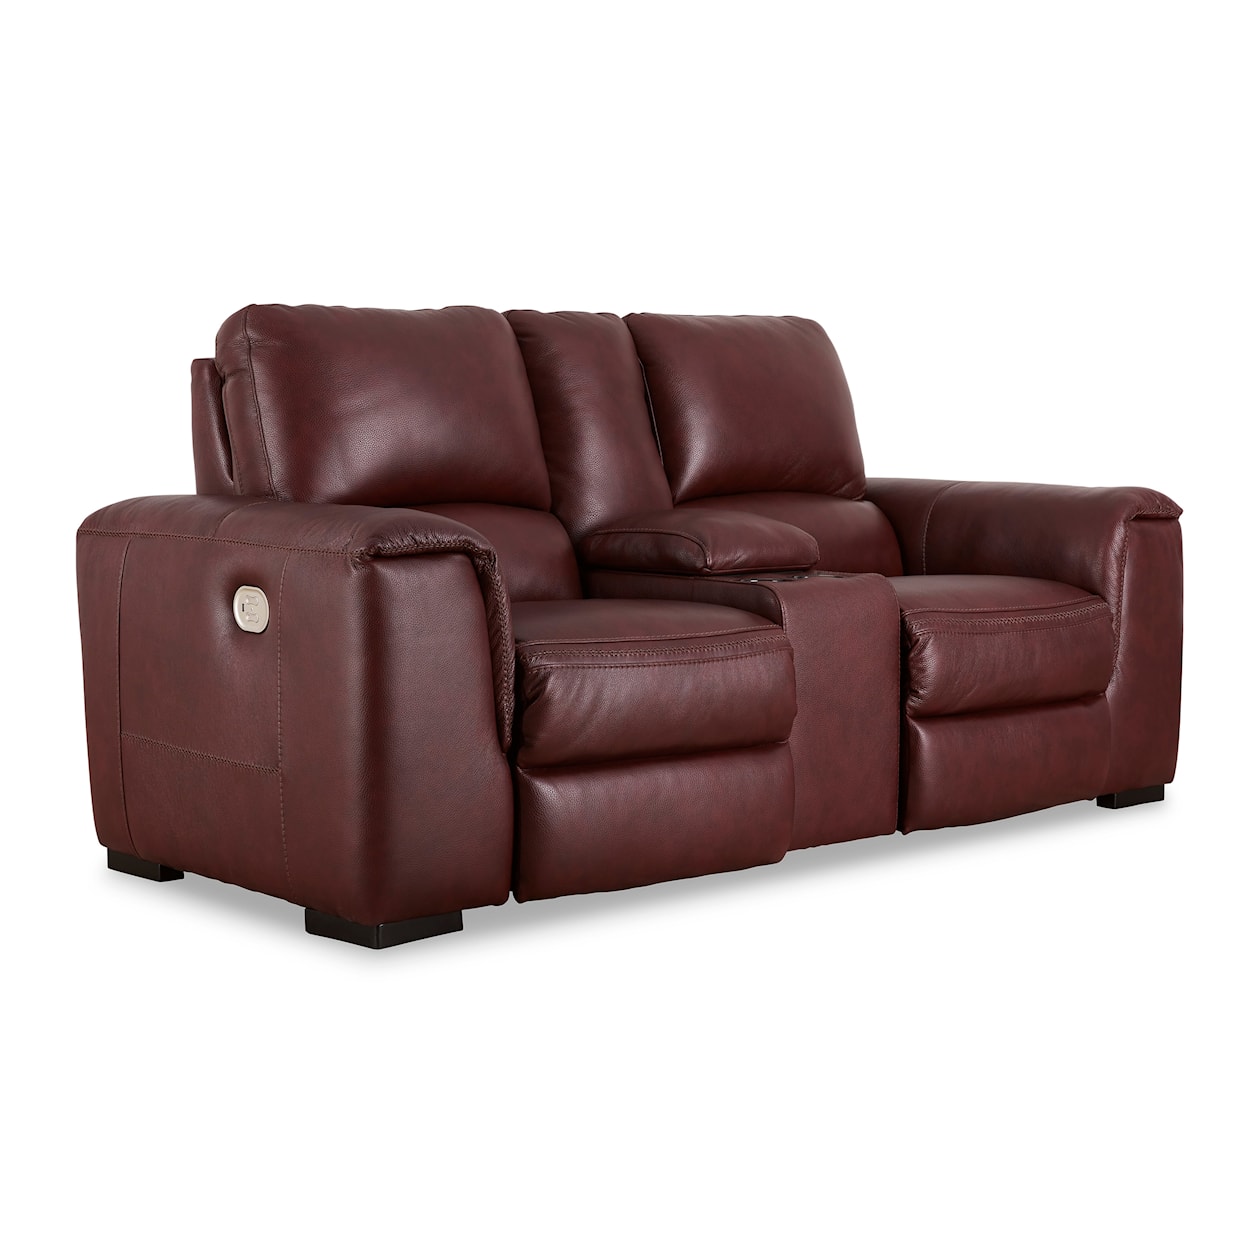 StyleLine Alessandro Power Reclining Loveseat with Console